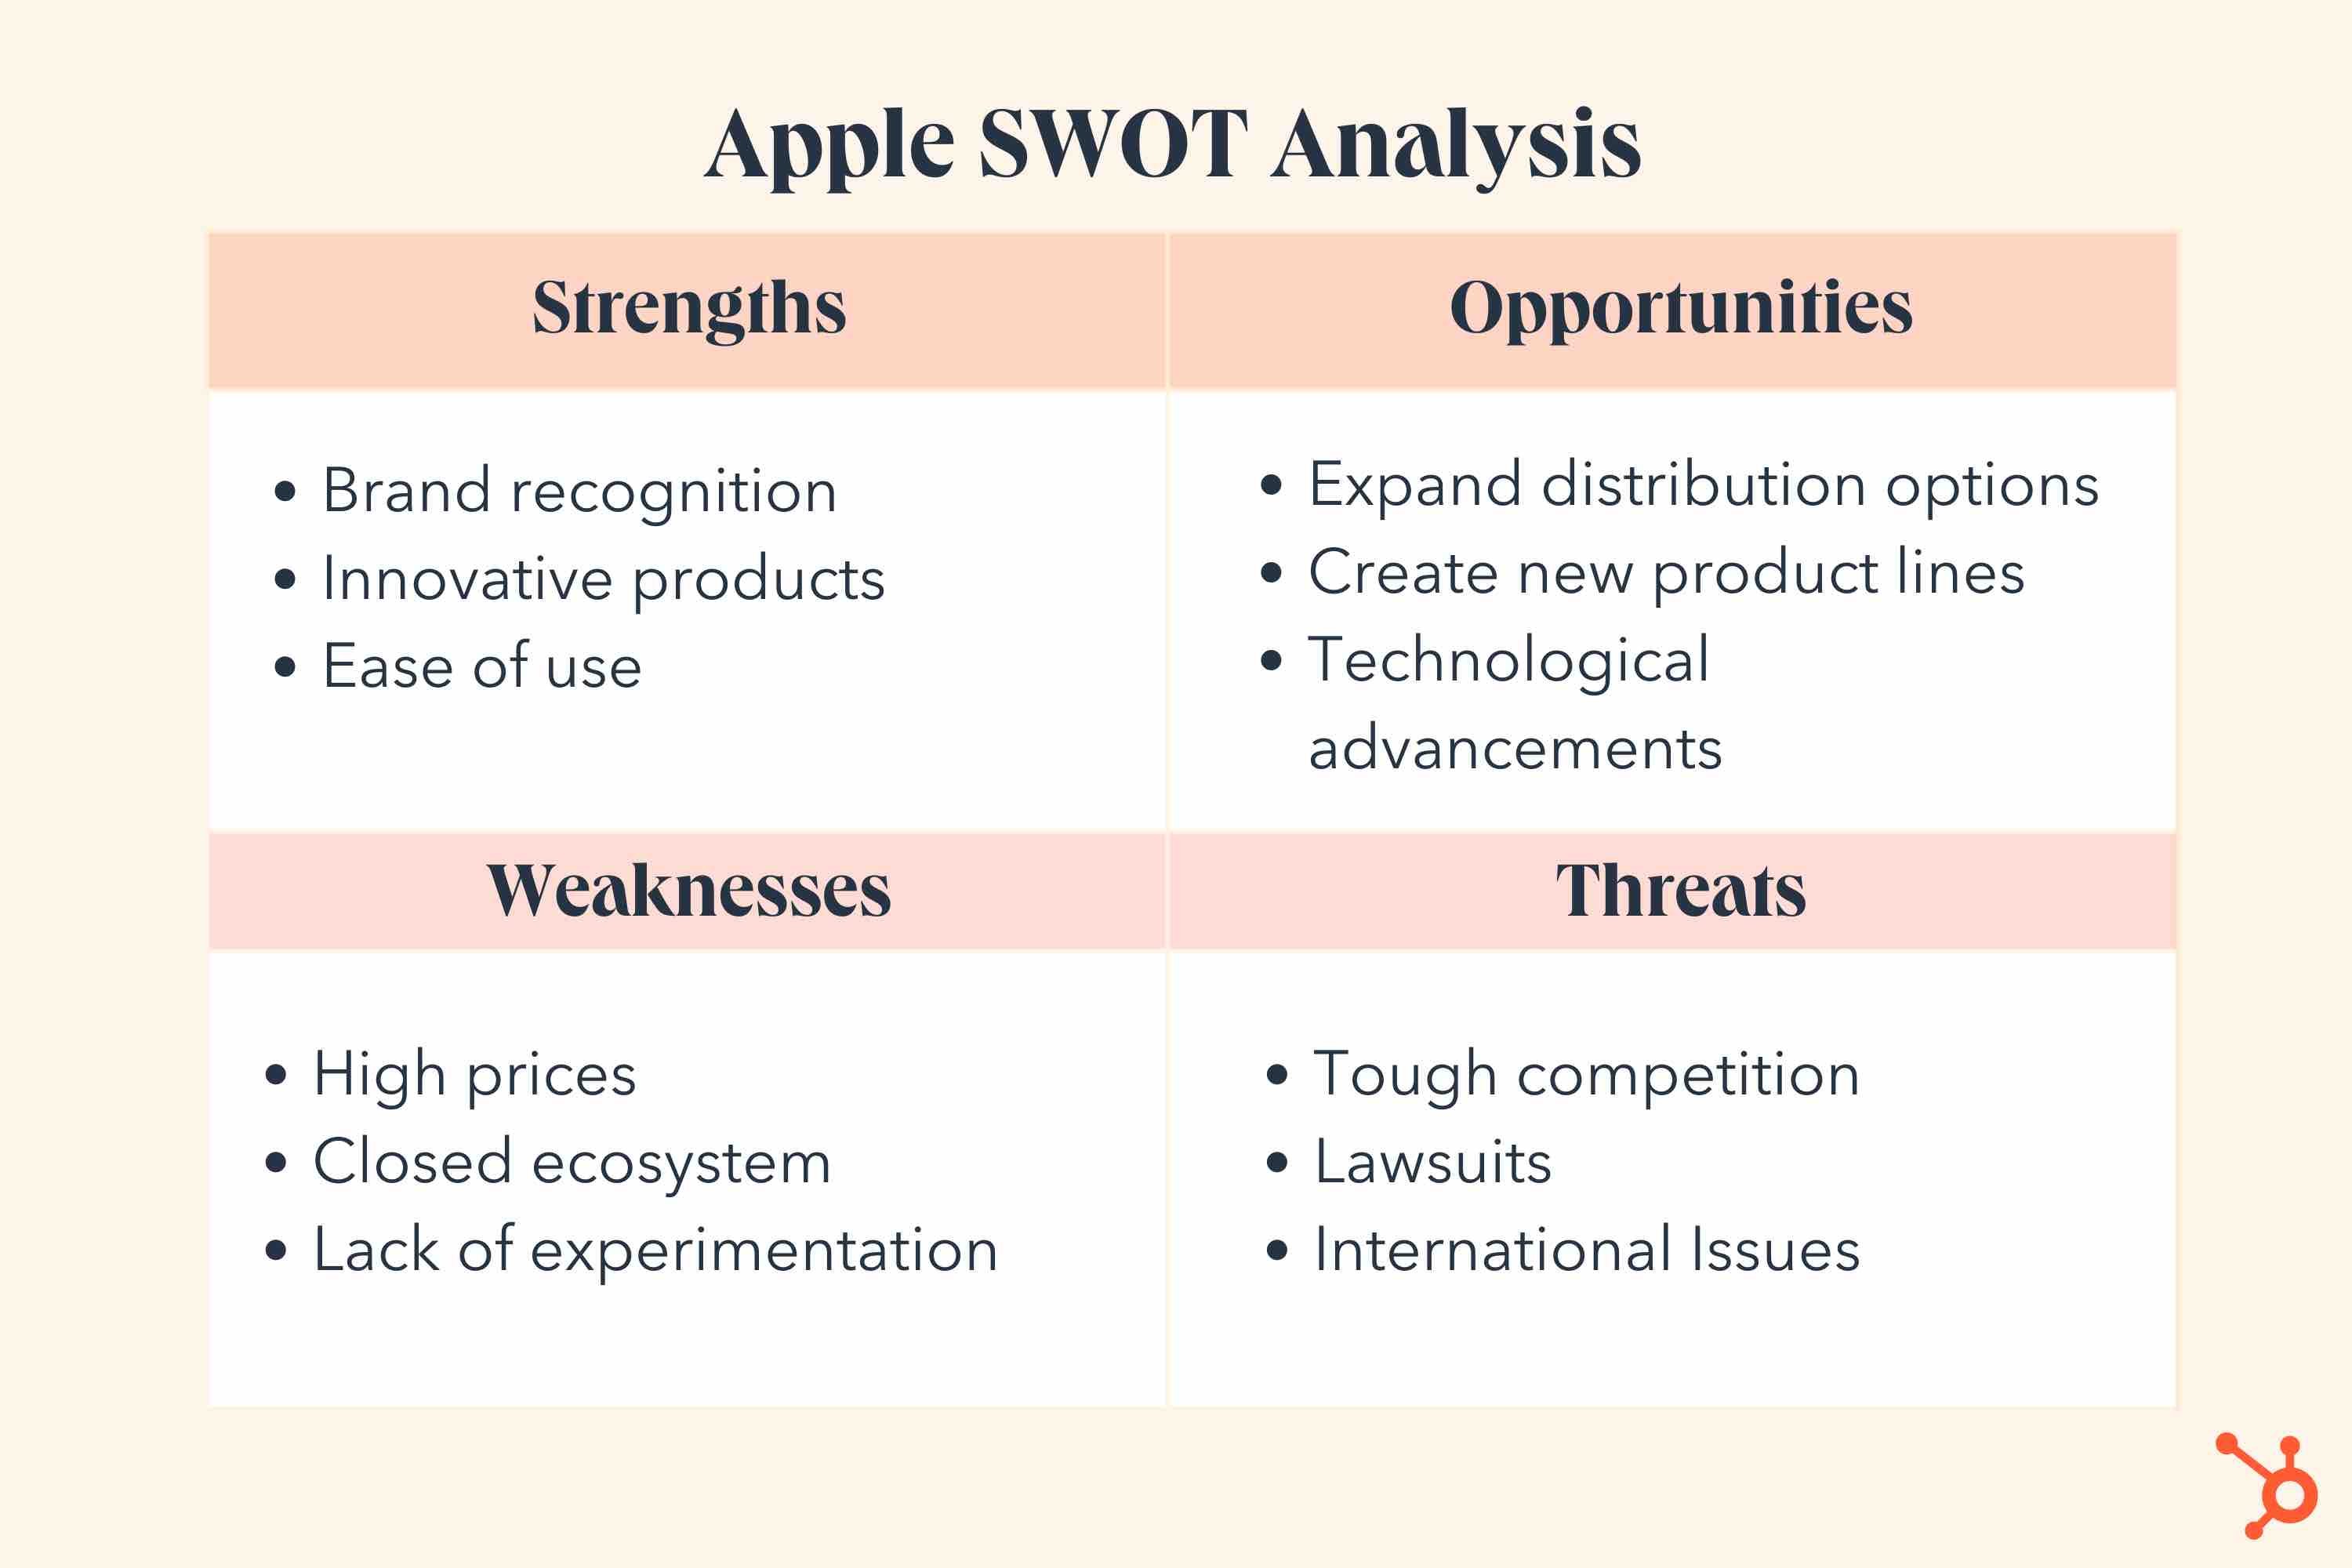 SWOT Analysis for Restaurant: Examples & Guide